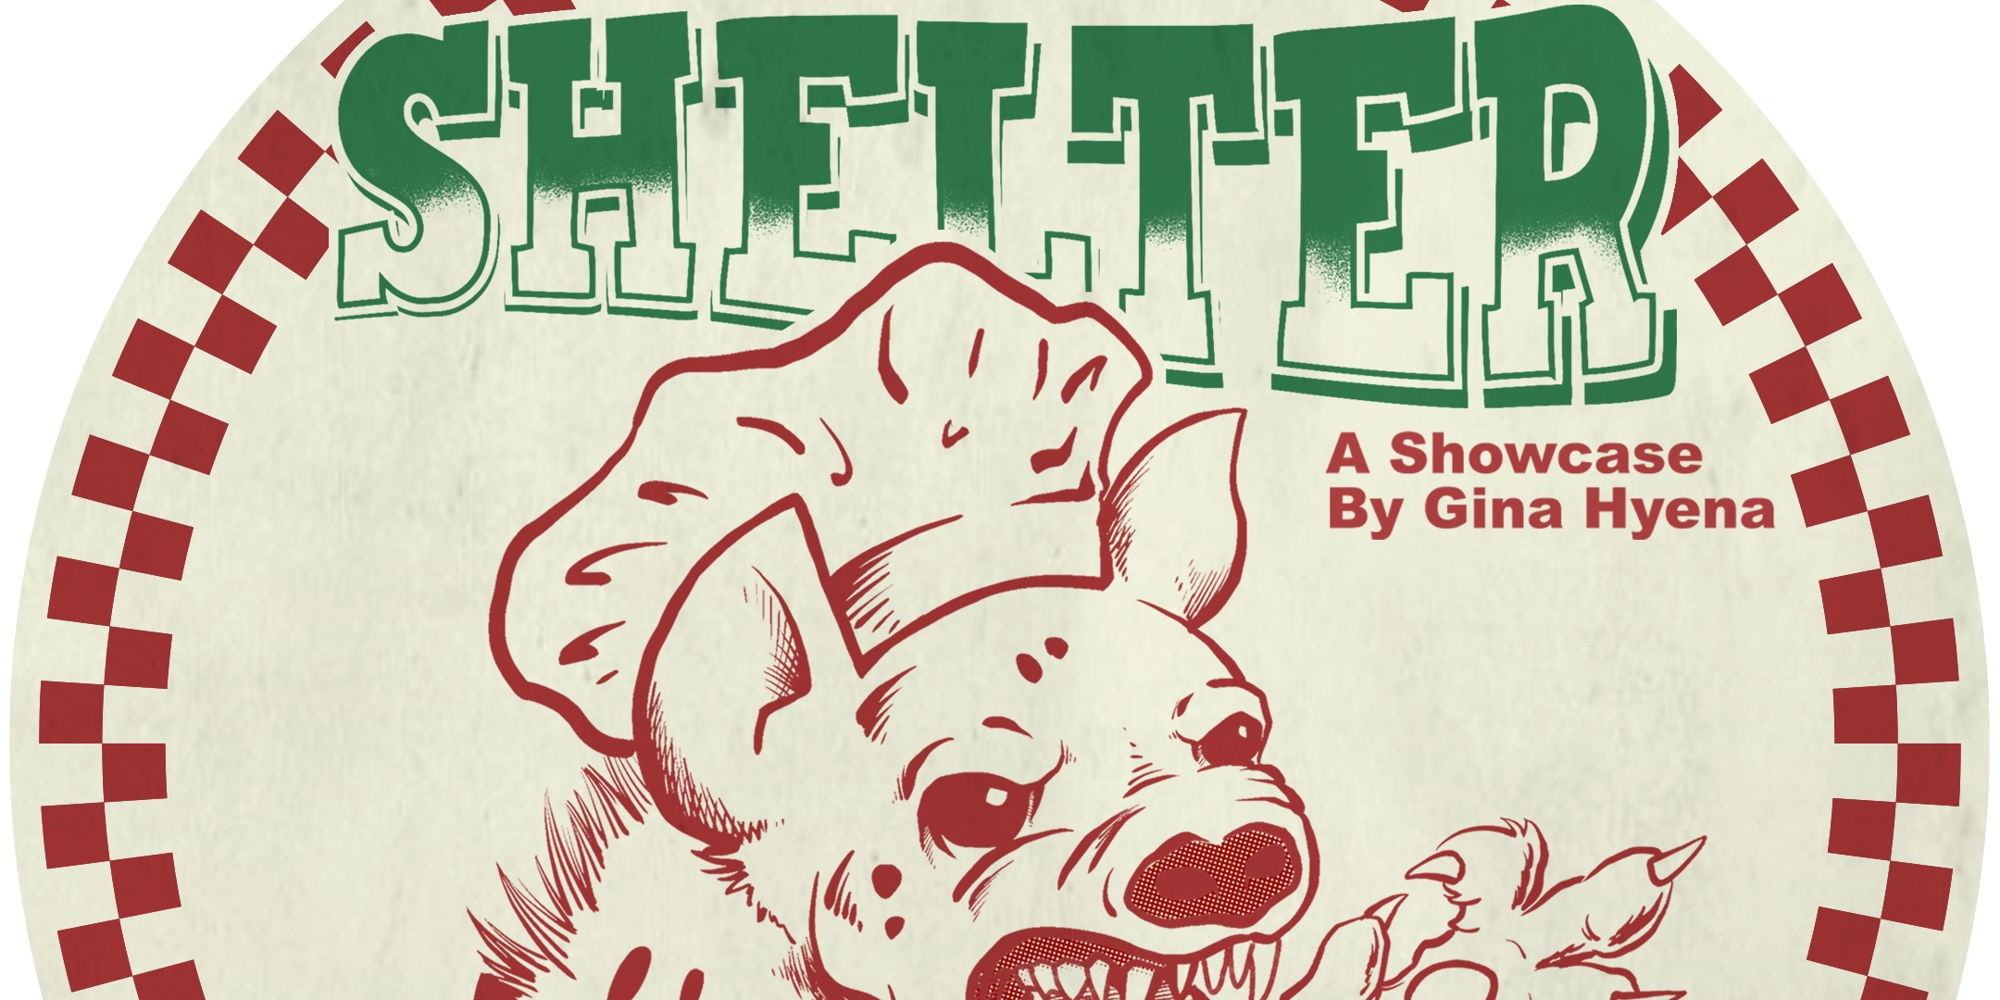 Shelter: A Comedy Showcase Curated By Gina Hyena promotional image